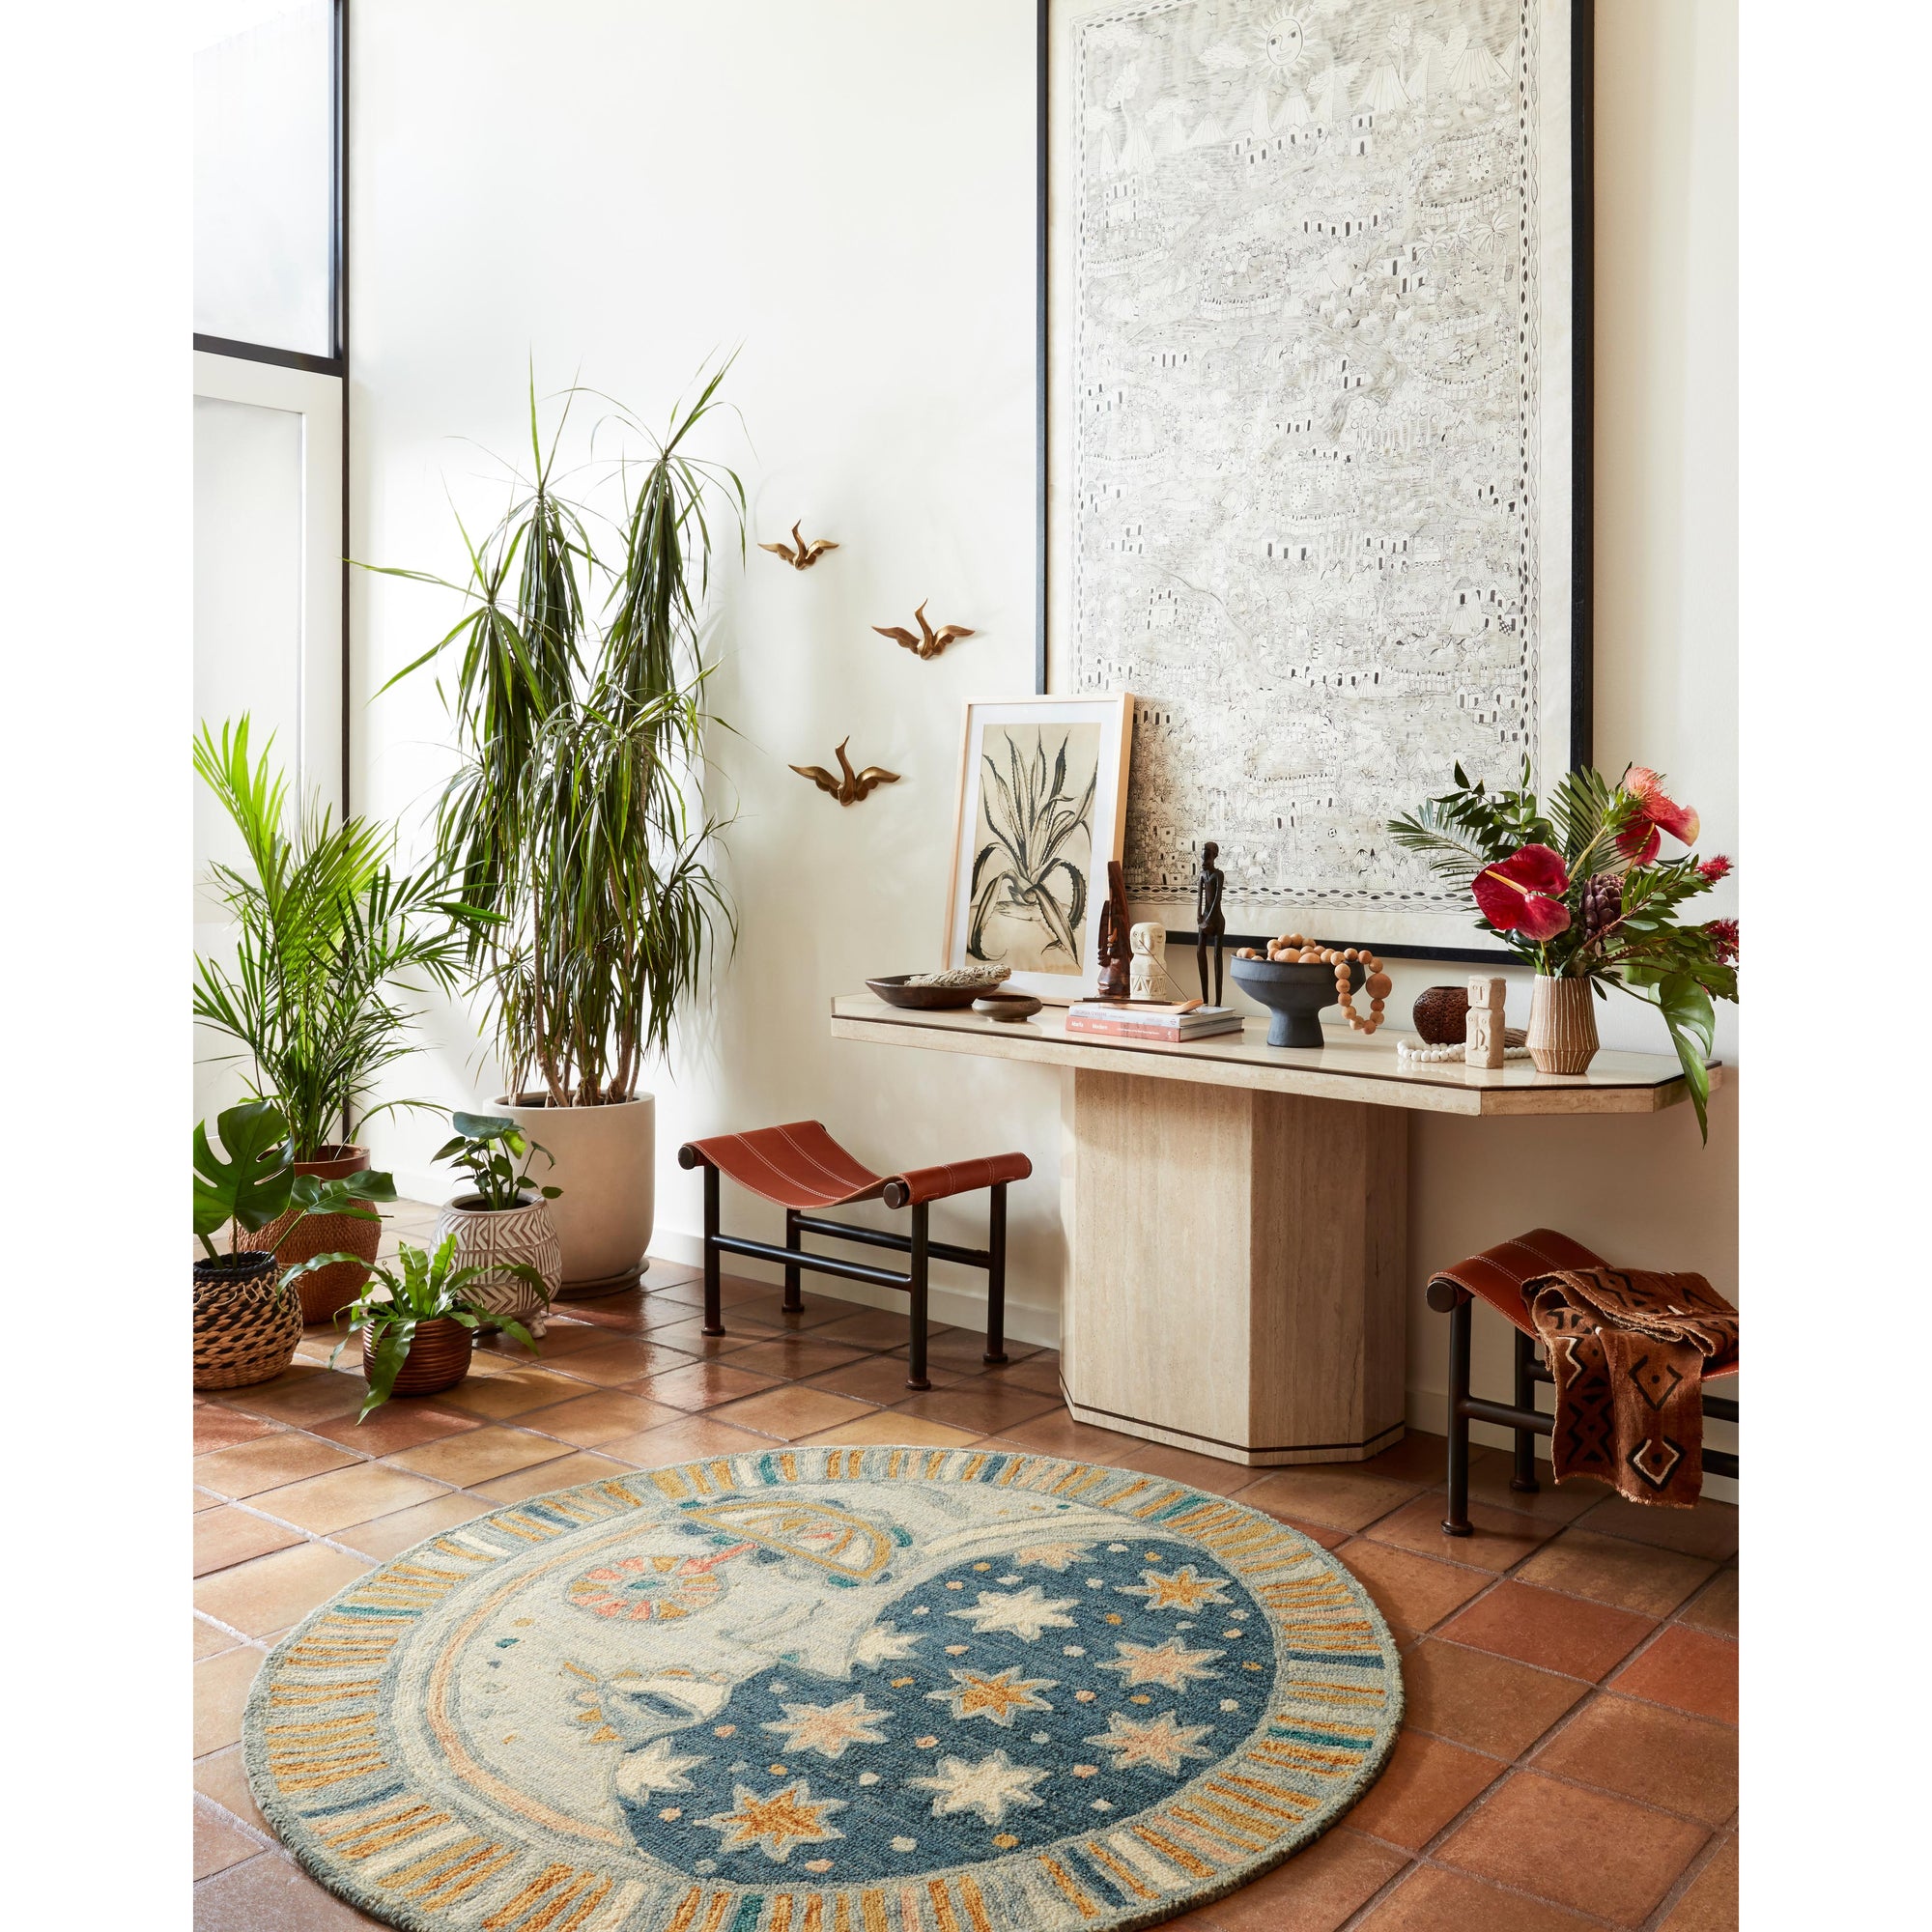 Rugs by Roo |  Loloi Ayo Ocean Sunrise Area Rug 5' 0" x 5' 0" Round